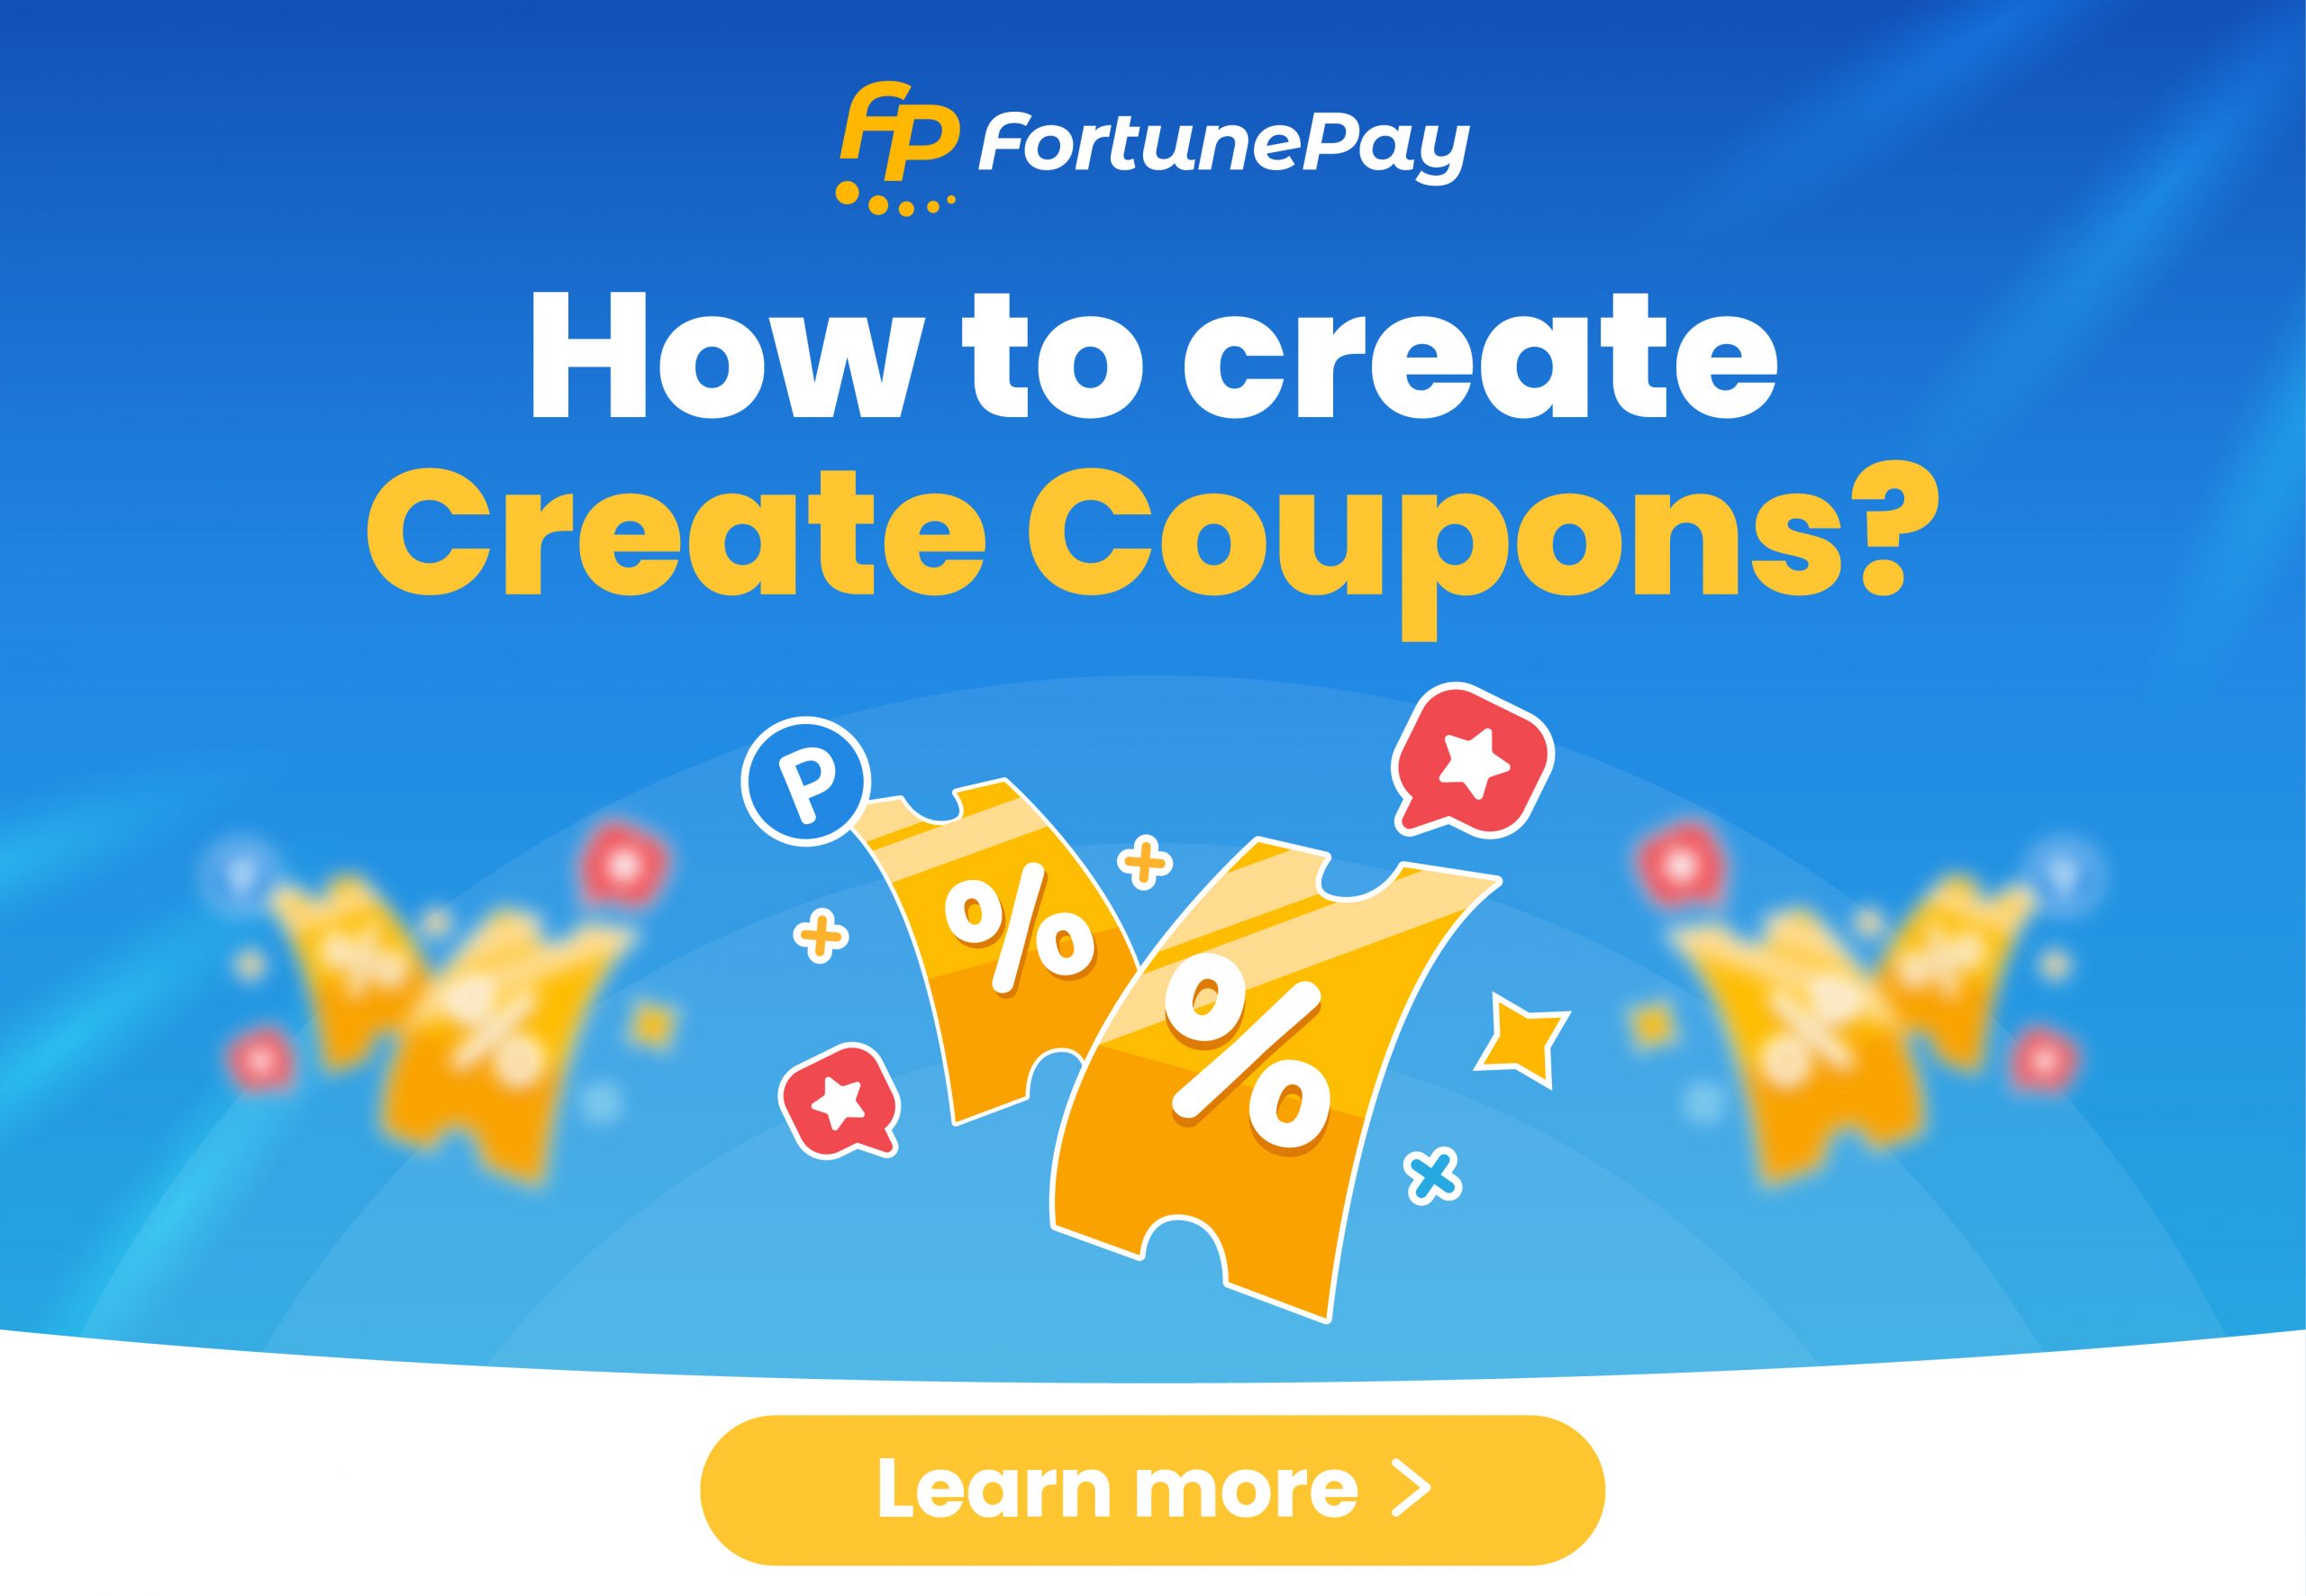 How to create Fortune Pay coupons